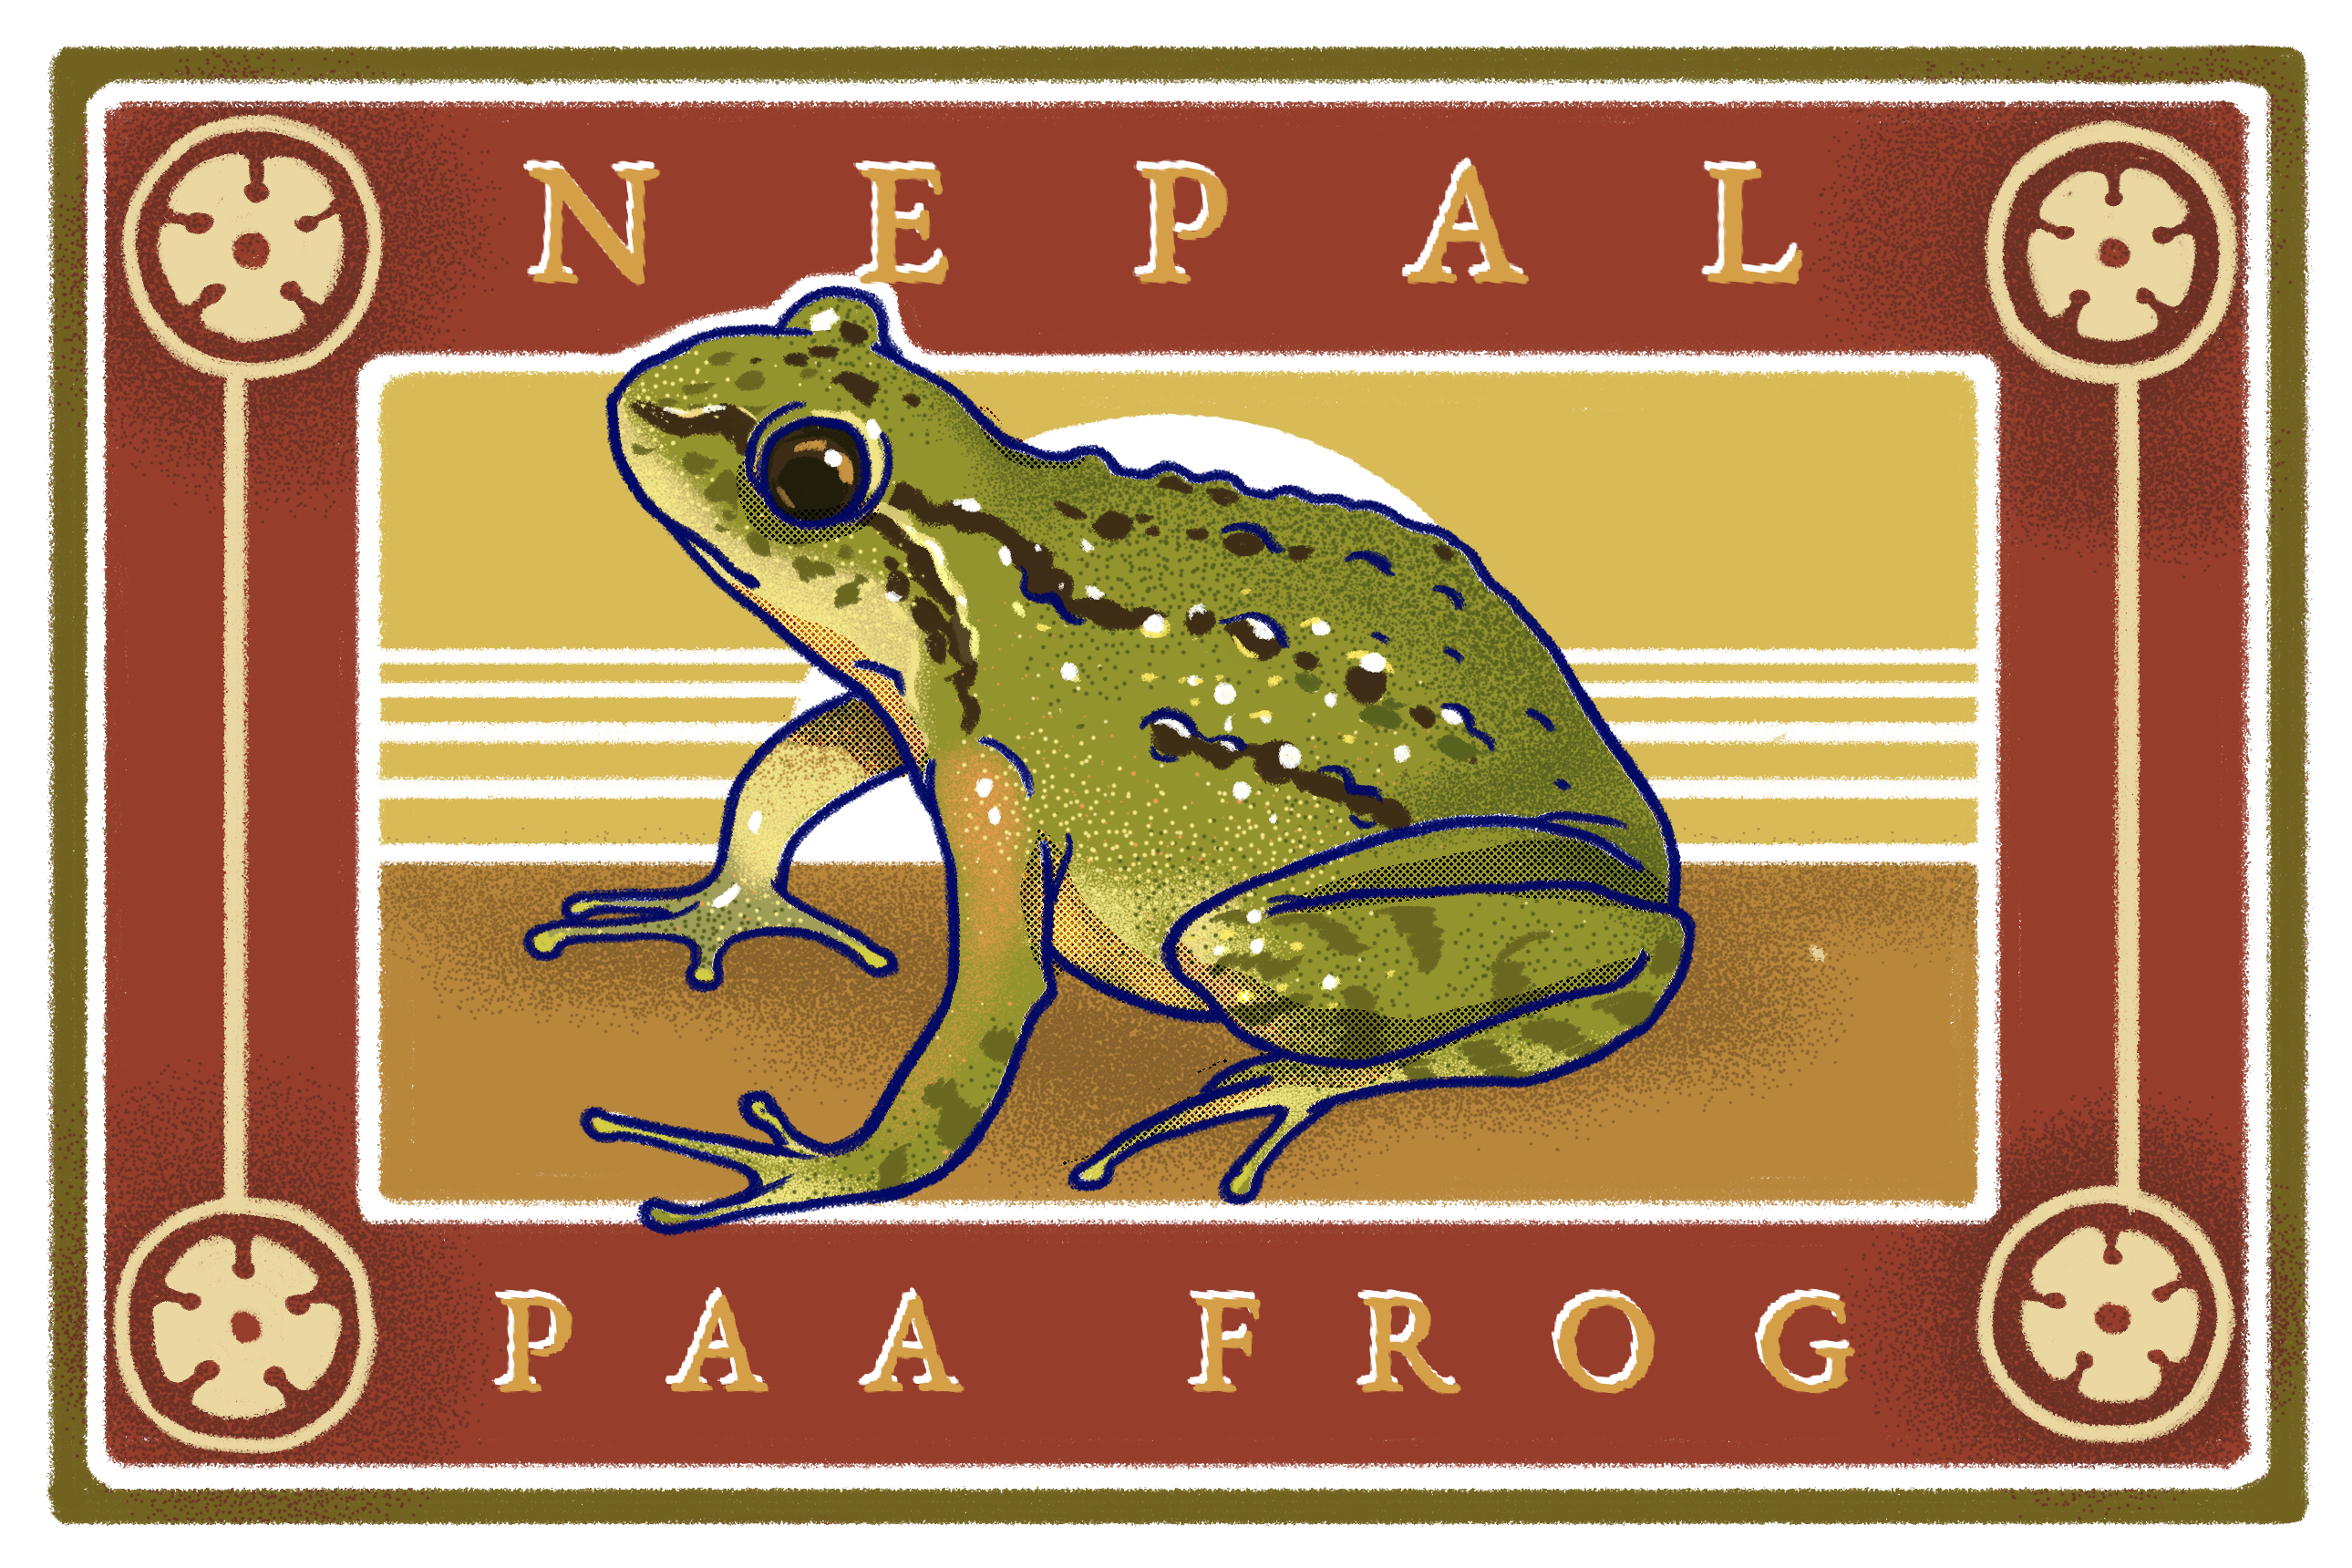 The threatened Nepal paa frog lives only in western Nepal and neighbouring India. The Nepal government’s list of wild animals which can be farmed for commercial purposes includes ‘frogs’ (Illustration: Kabini Amin)